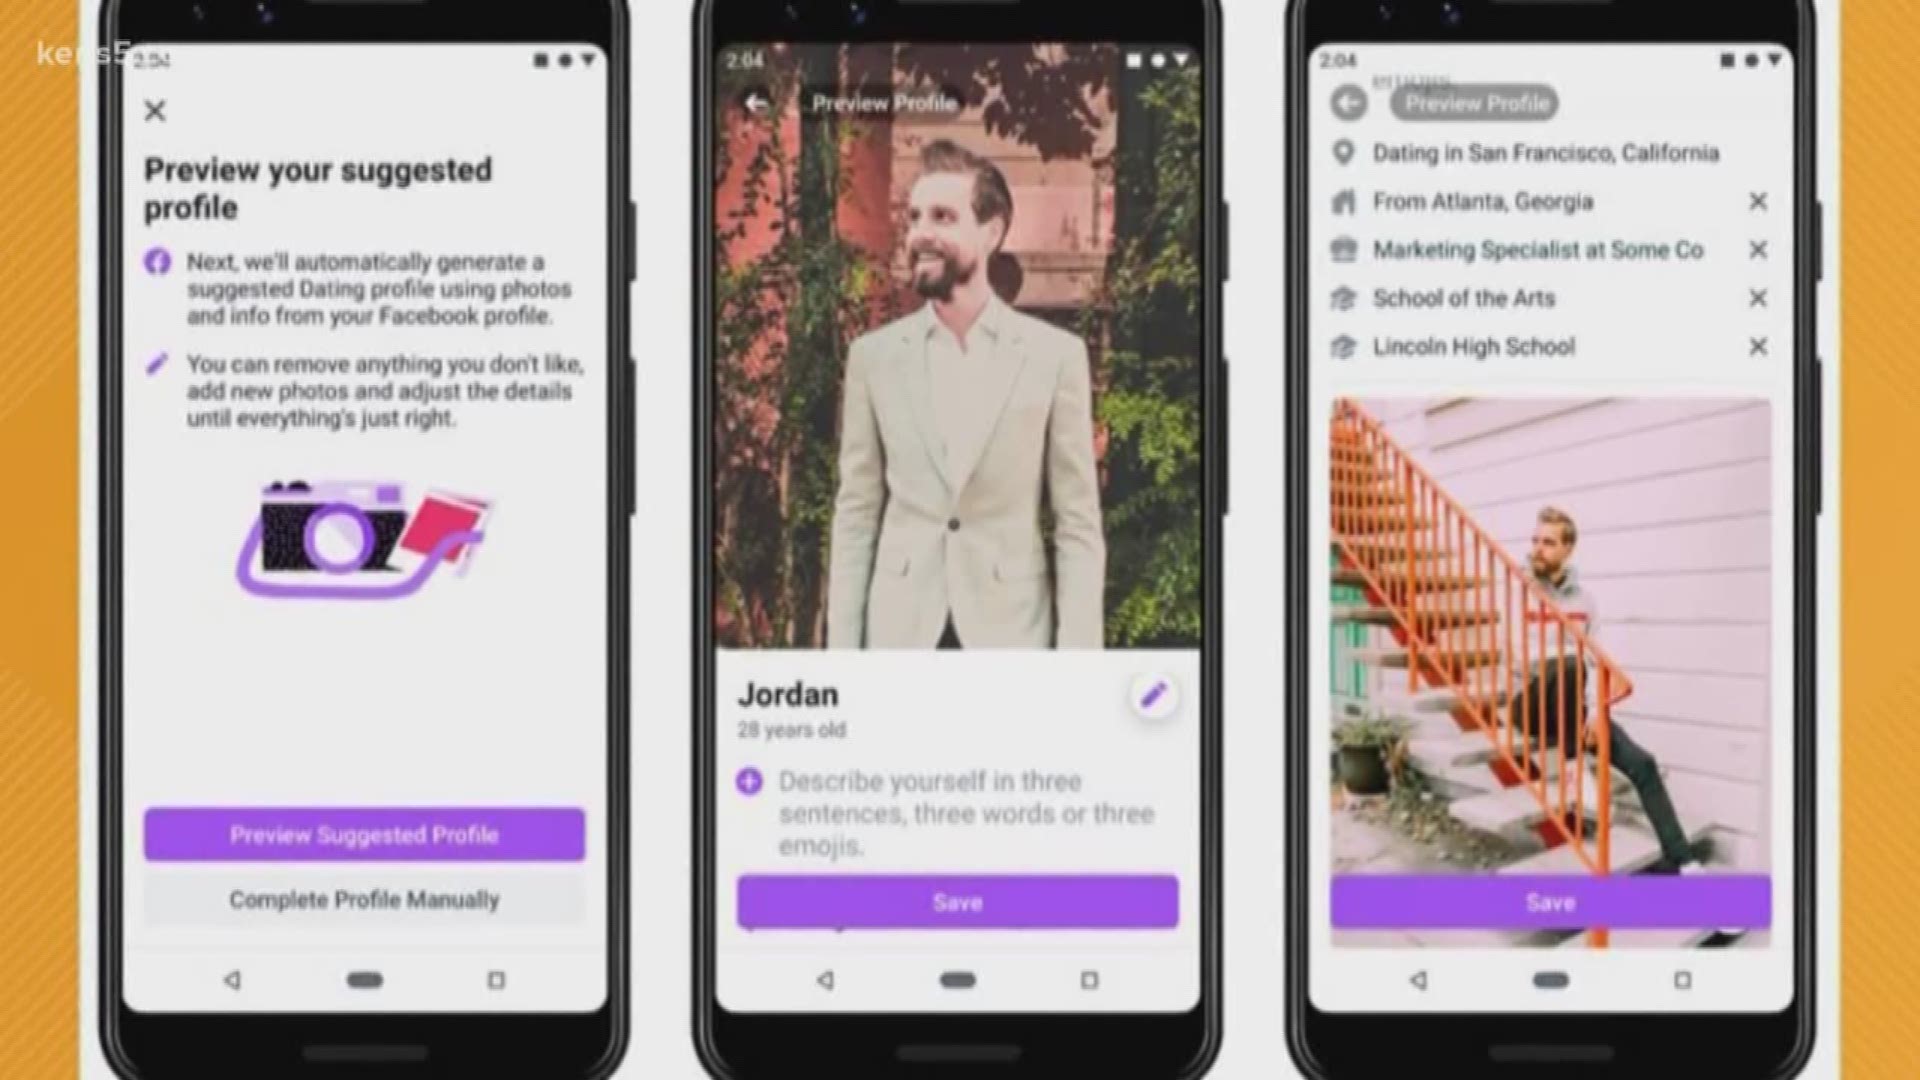 Earlier this week, Facebook came out with its new matchmaking service Facebook Dating. Digital Journalist Megan Ball joins us from the newsroom with more on the new service.